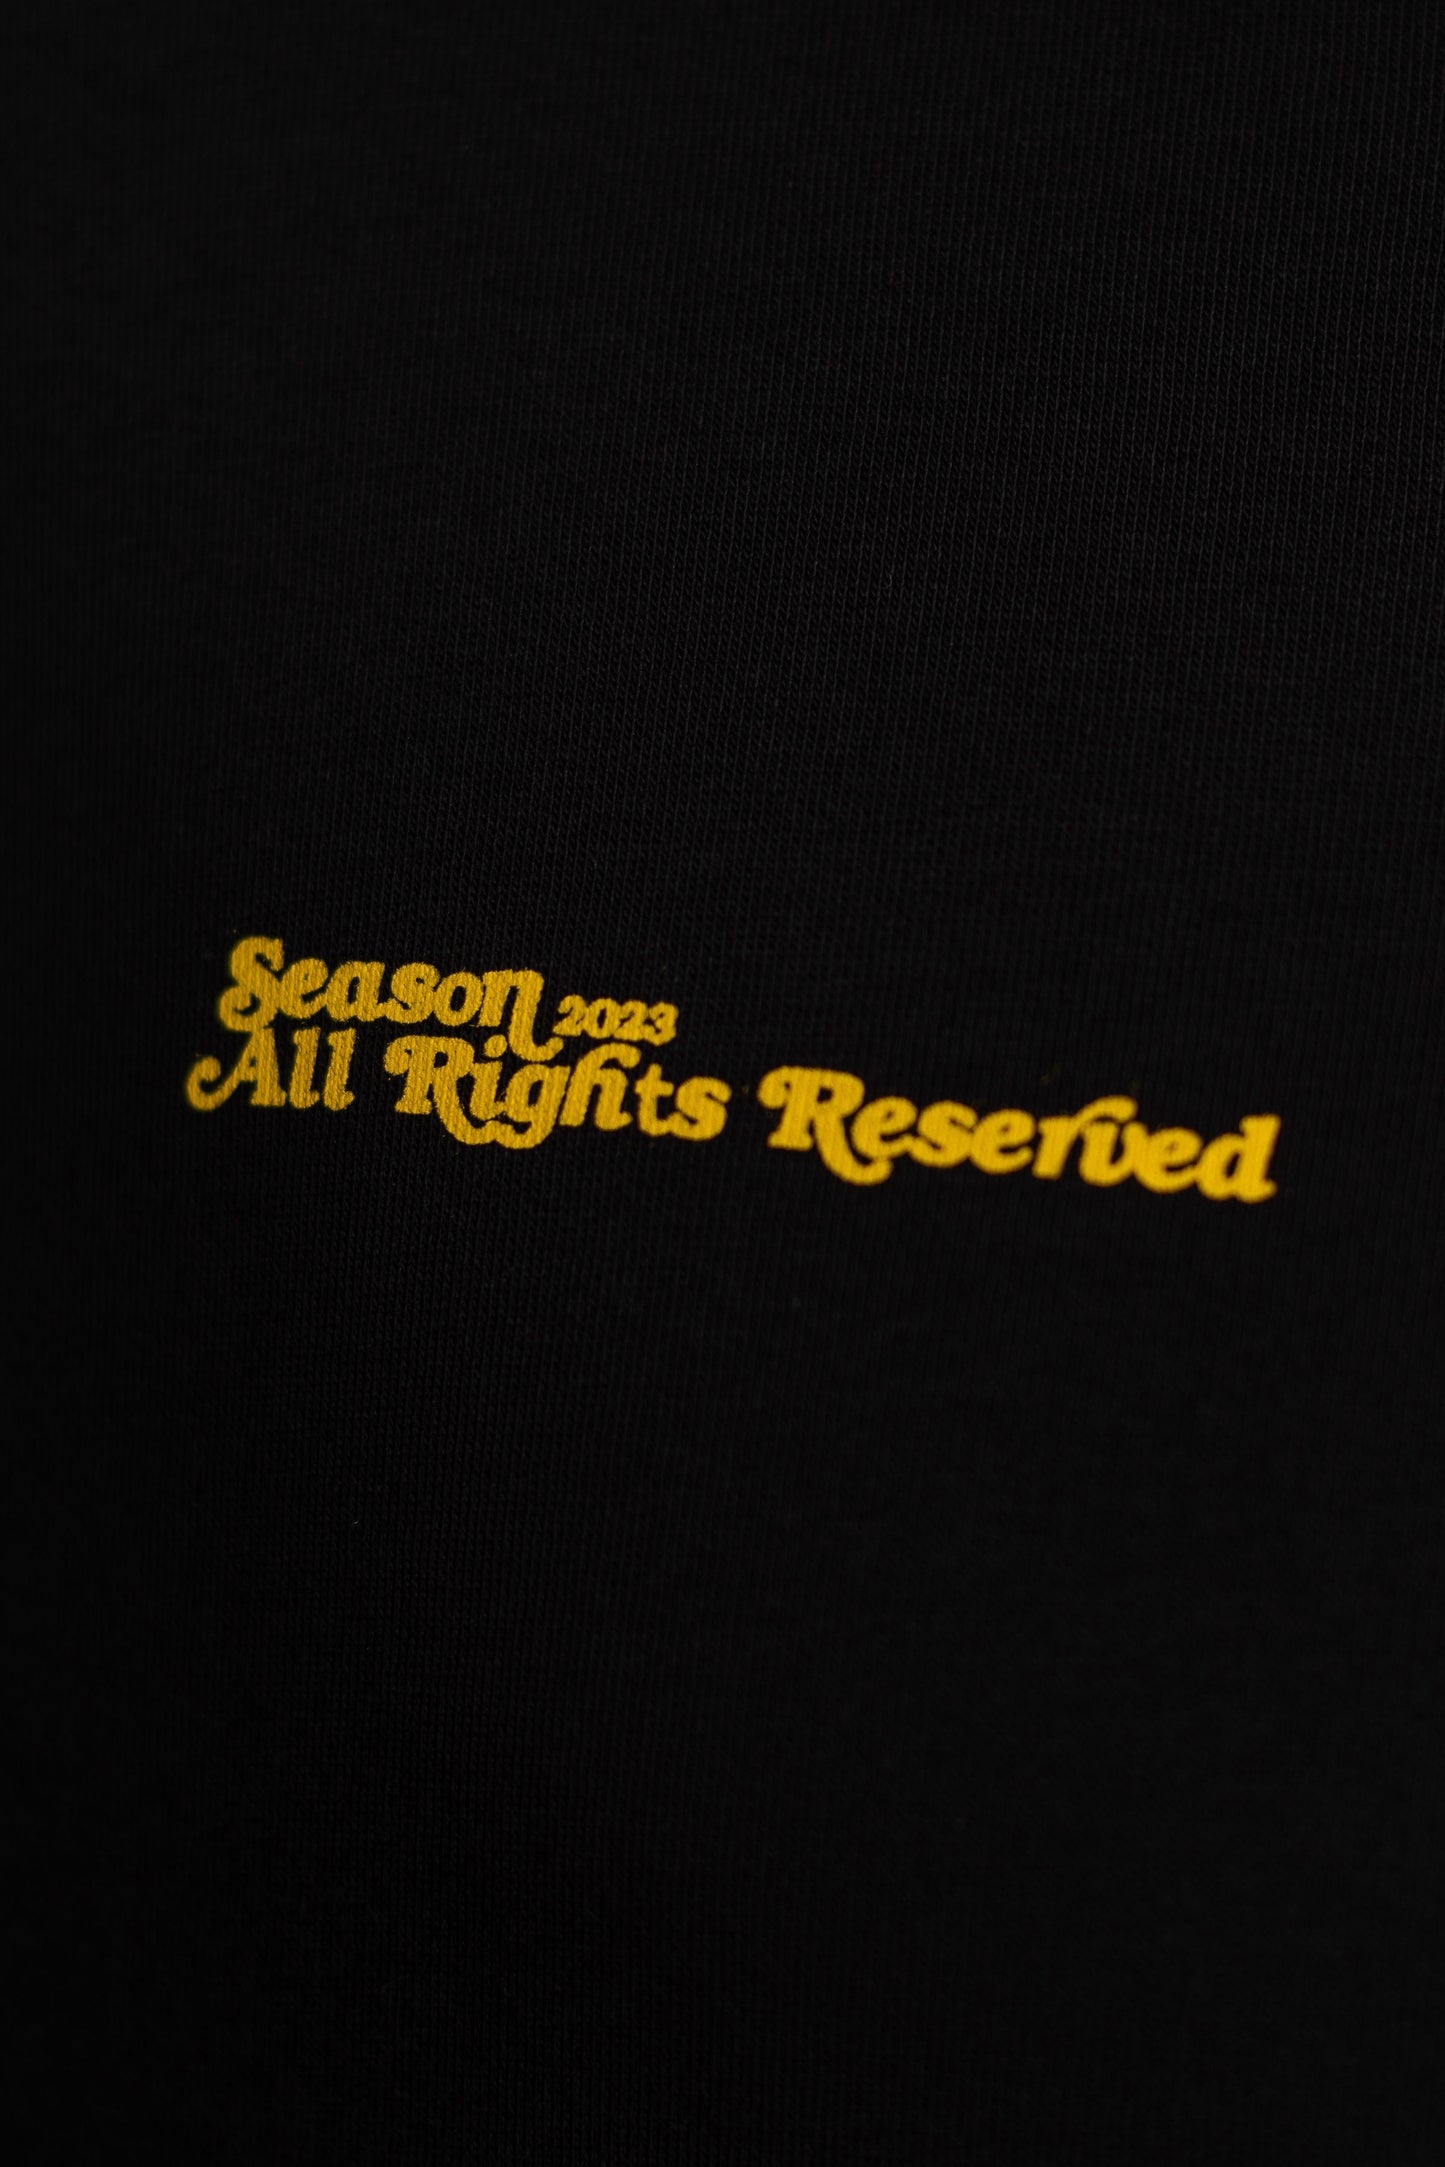 All rights Reserved Sweater